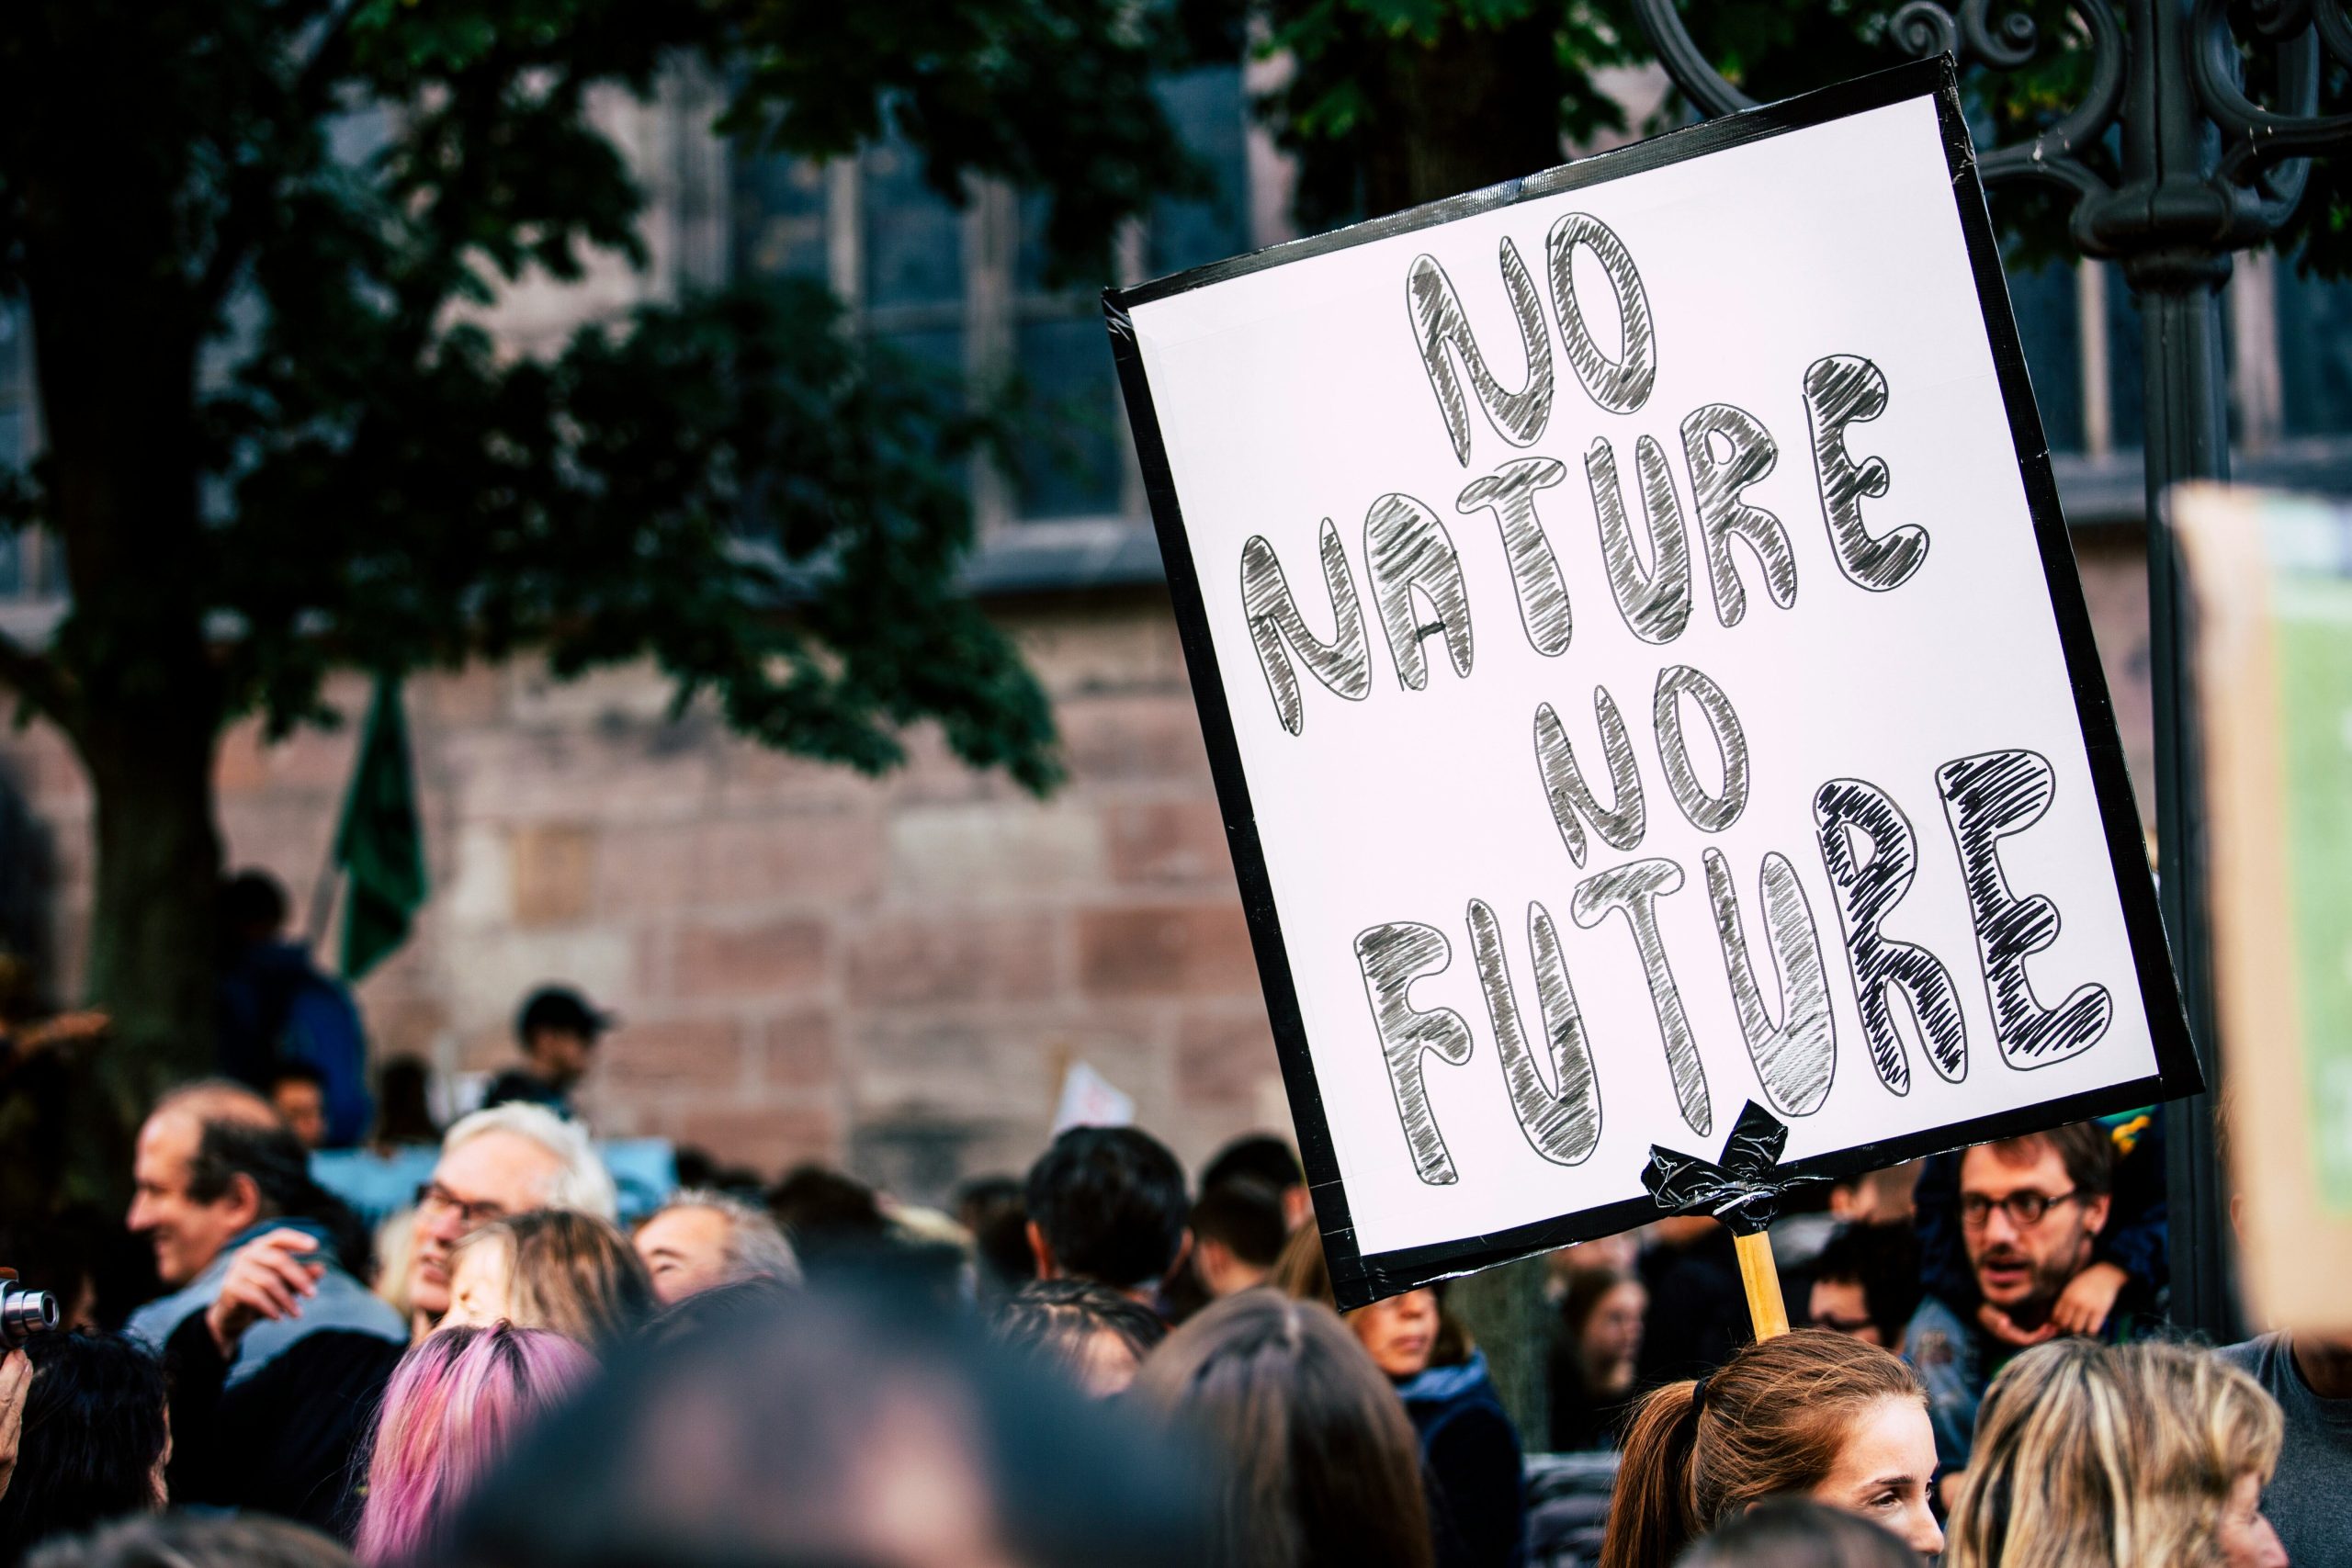 a banner can be seen amidst a protest that has the words 'no nature no future'